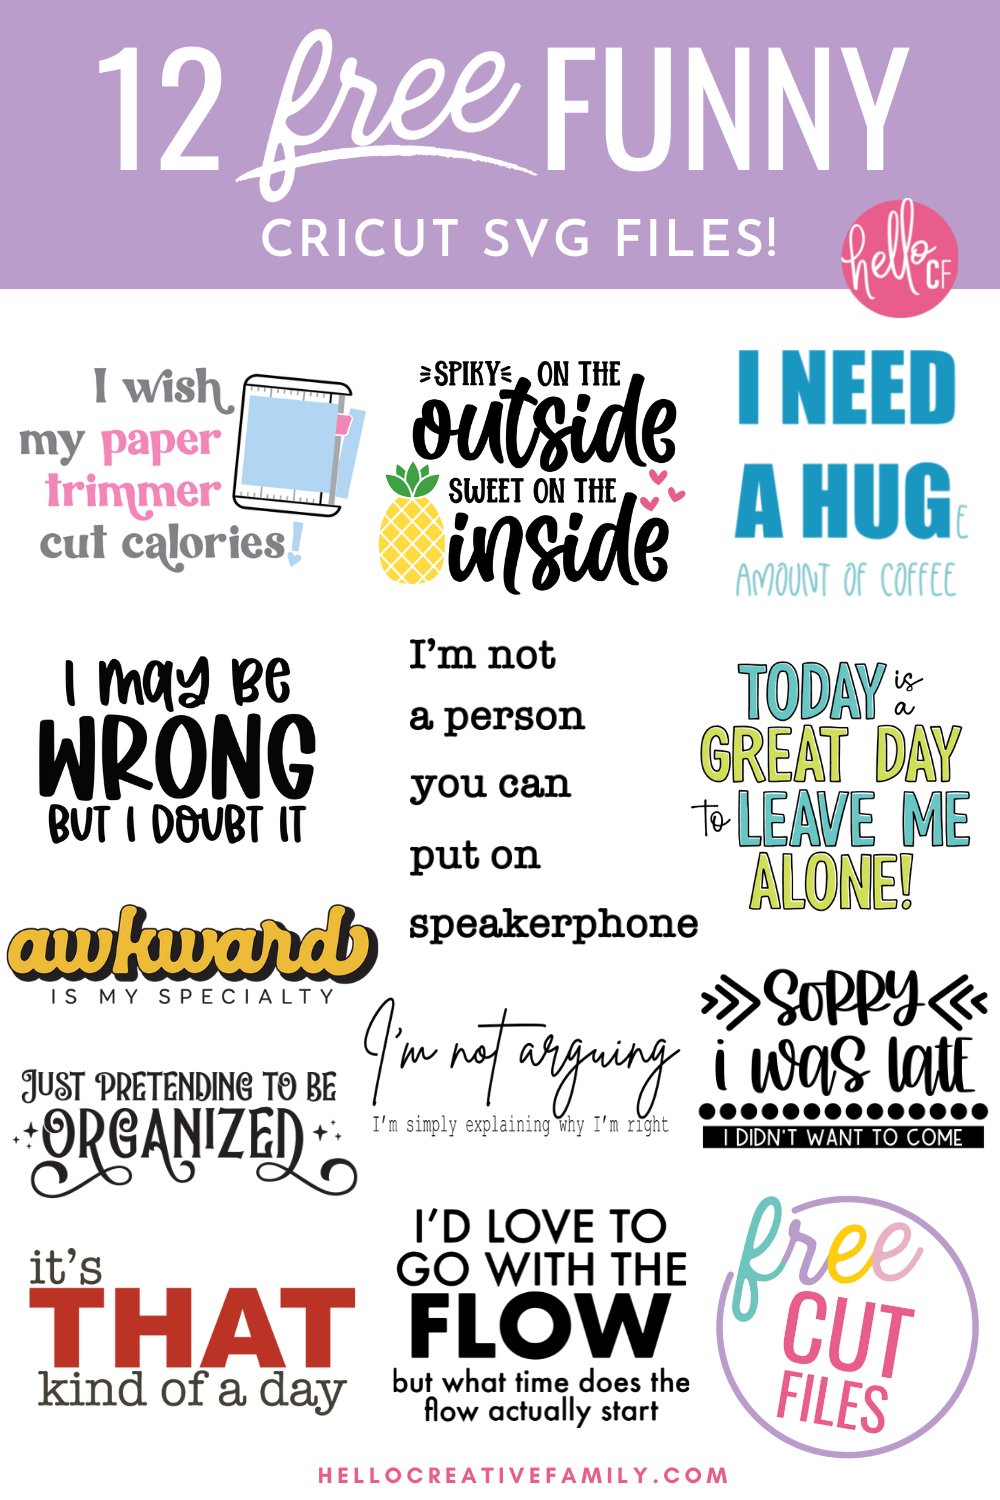 Tickle your funny bone with 12 free sarcastic and funny SVG files! Use them for your next Cricut craft project for laugh out loud results! These funny SVG designs can be used to make a variety of projects with your Cricut including mugs, shirts, wine tumblers, laptops, water bottles and so much more! Includes Spiky On The Outside Sweet On The Inside Pineapple Cut File!